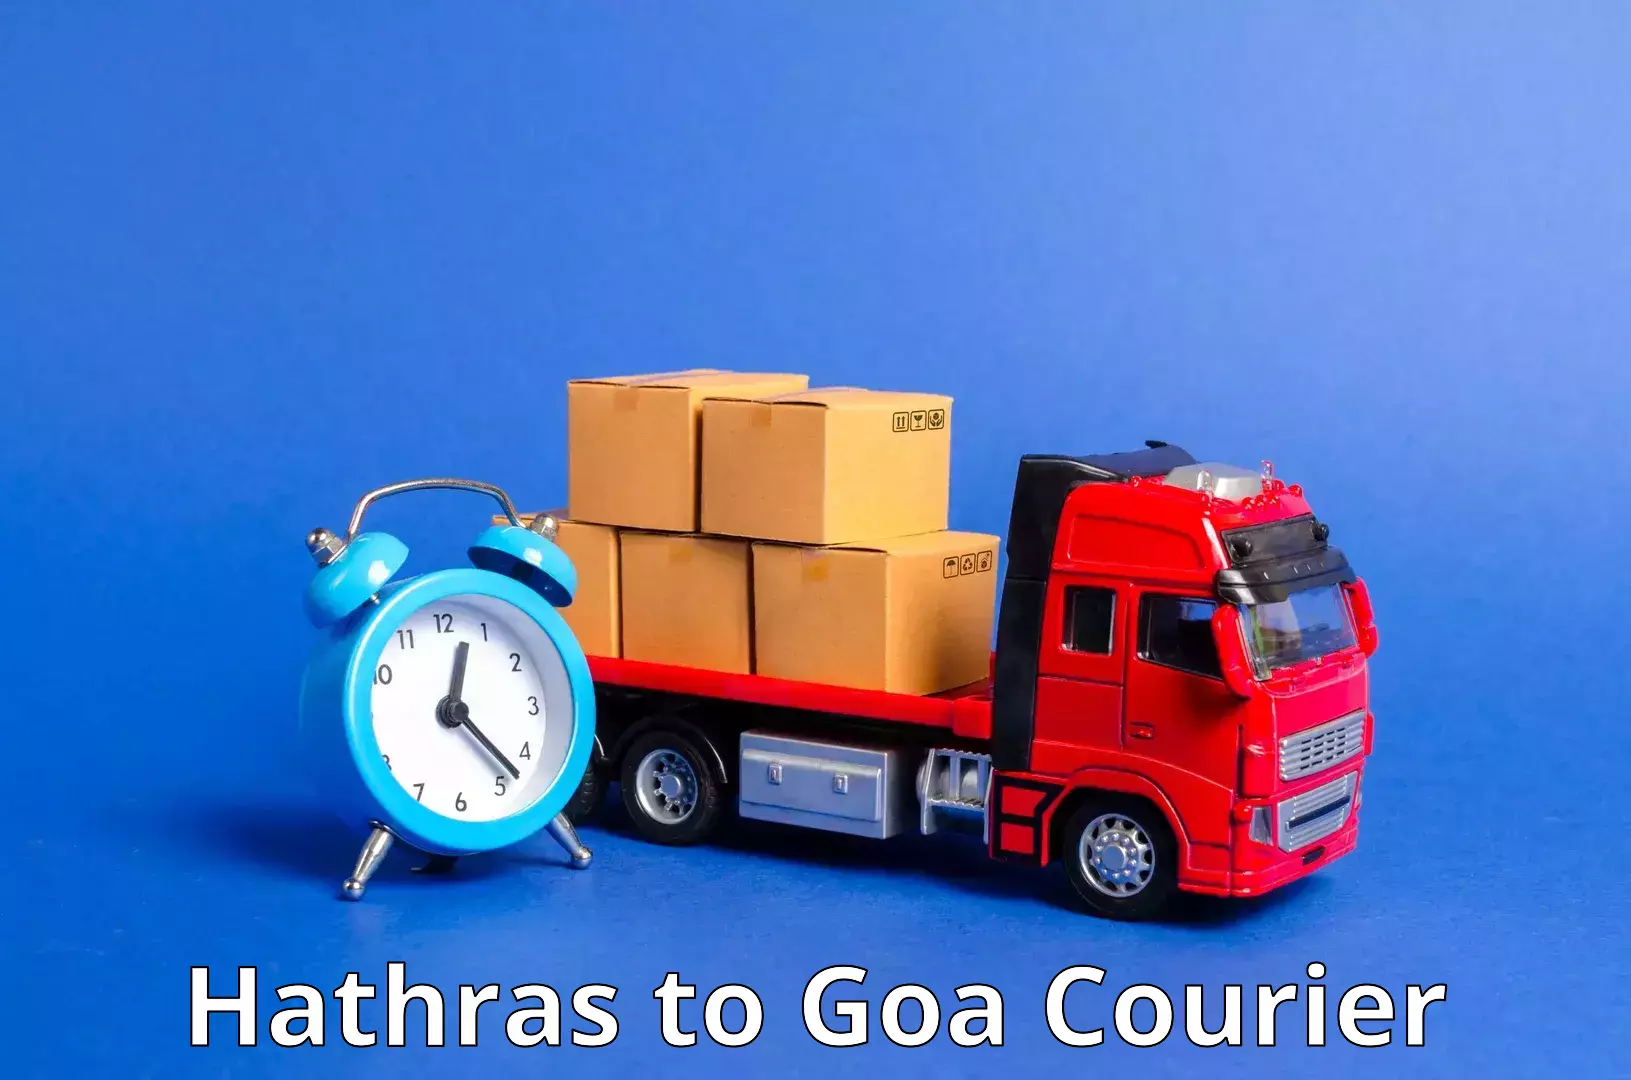 Modern courier technology Hathras to Panjim